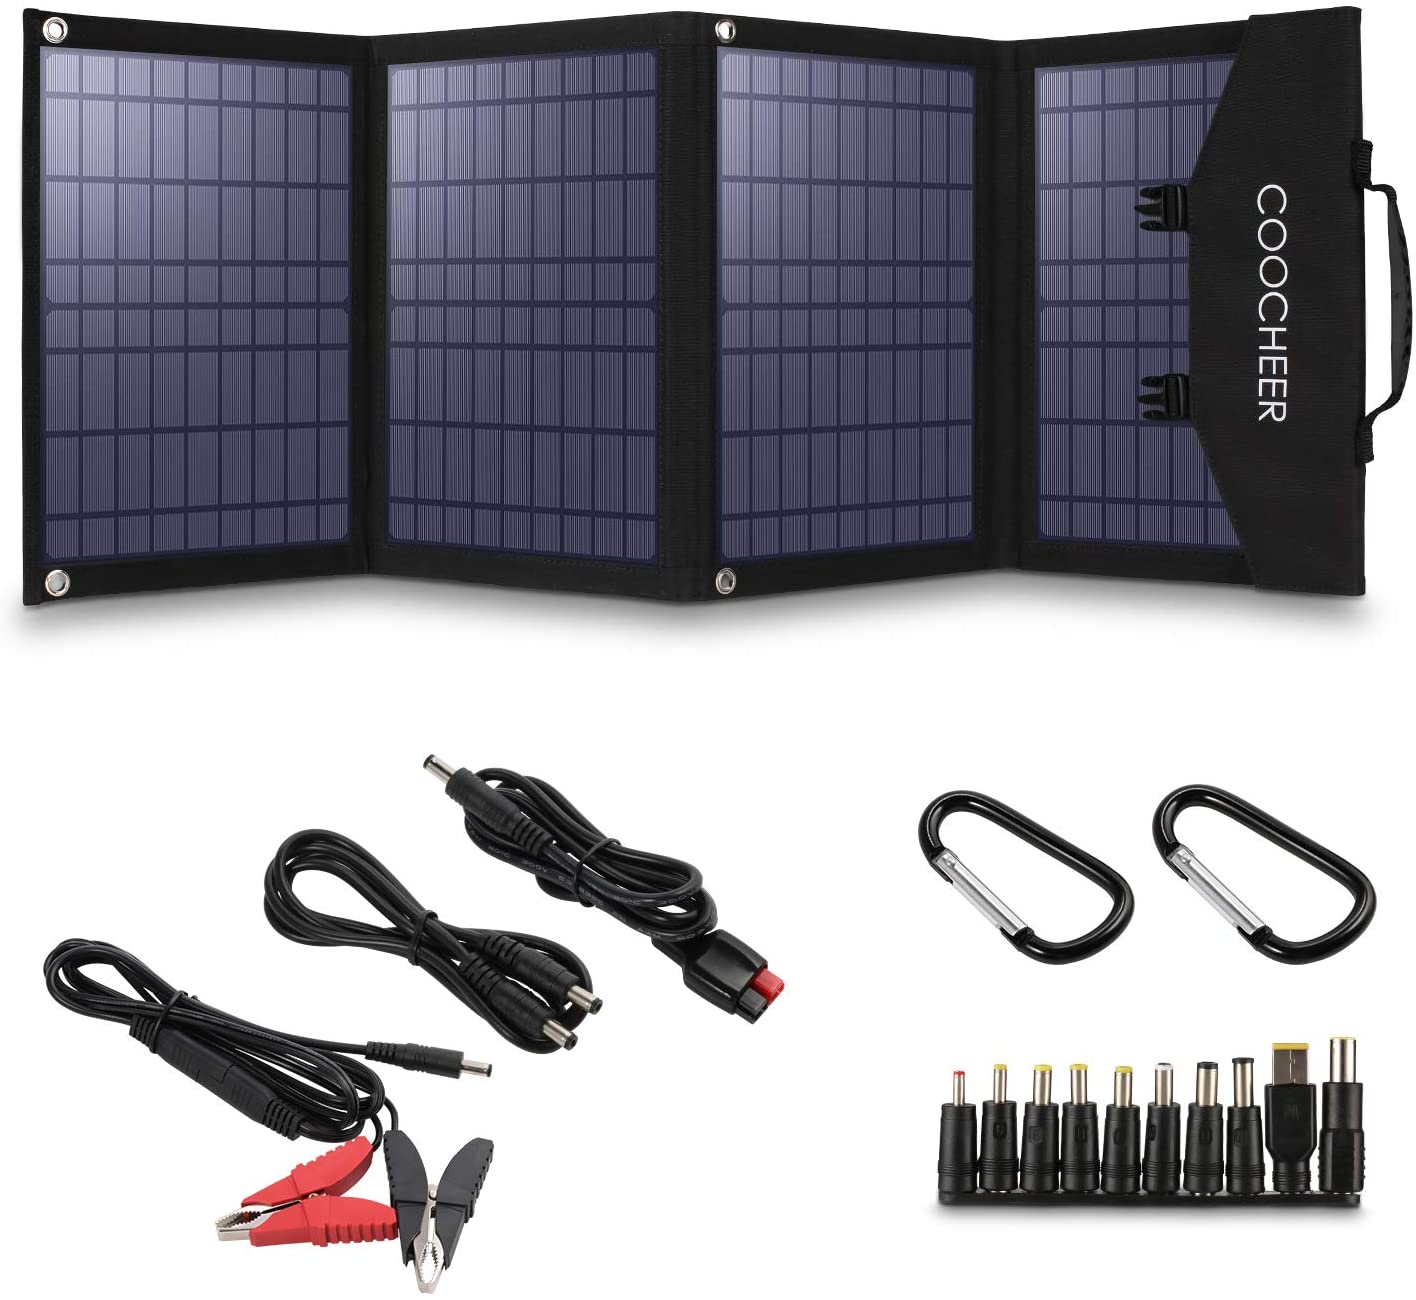 Top 10 Best Foldable Solar Panels in 2021 Reviews | Buyer's Guide